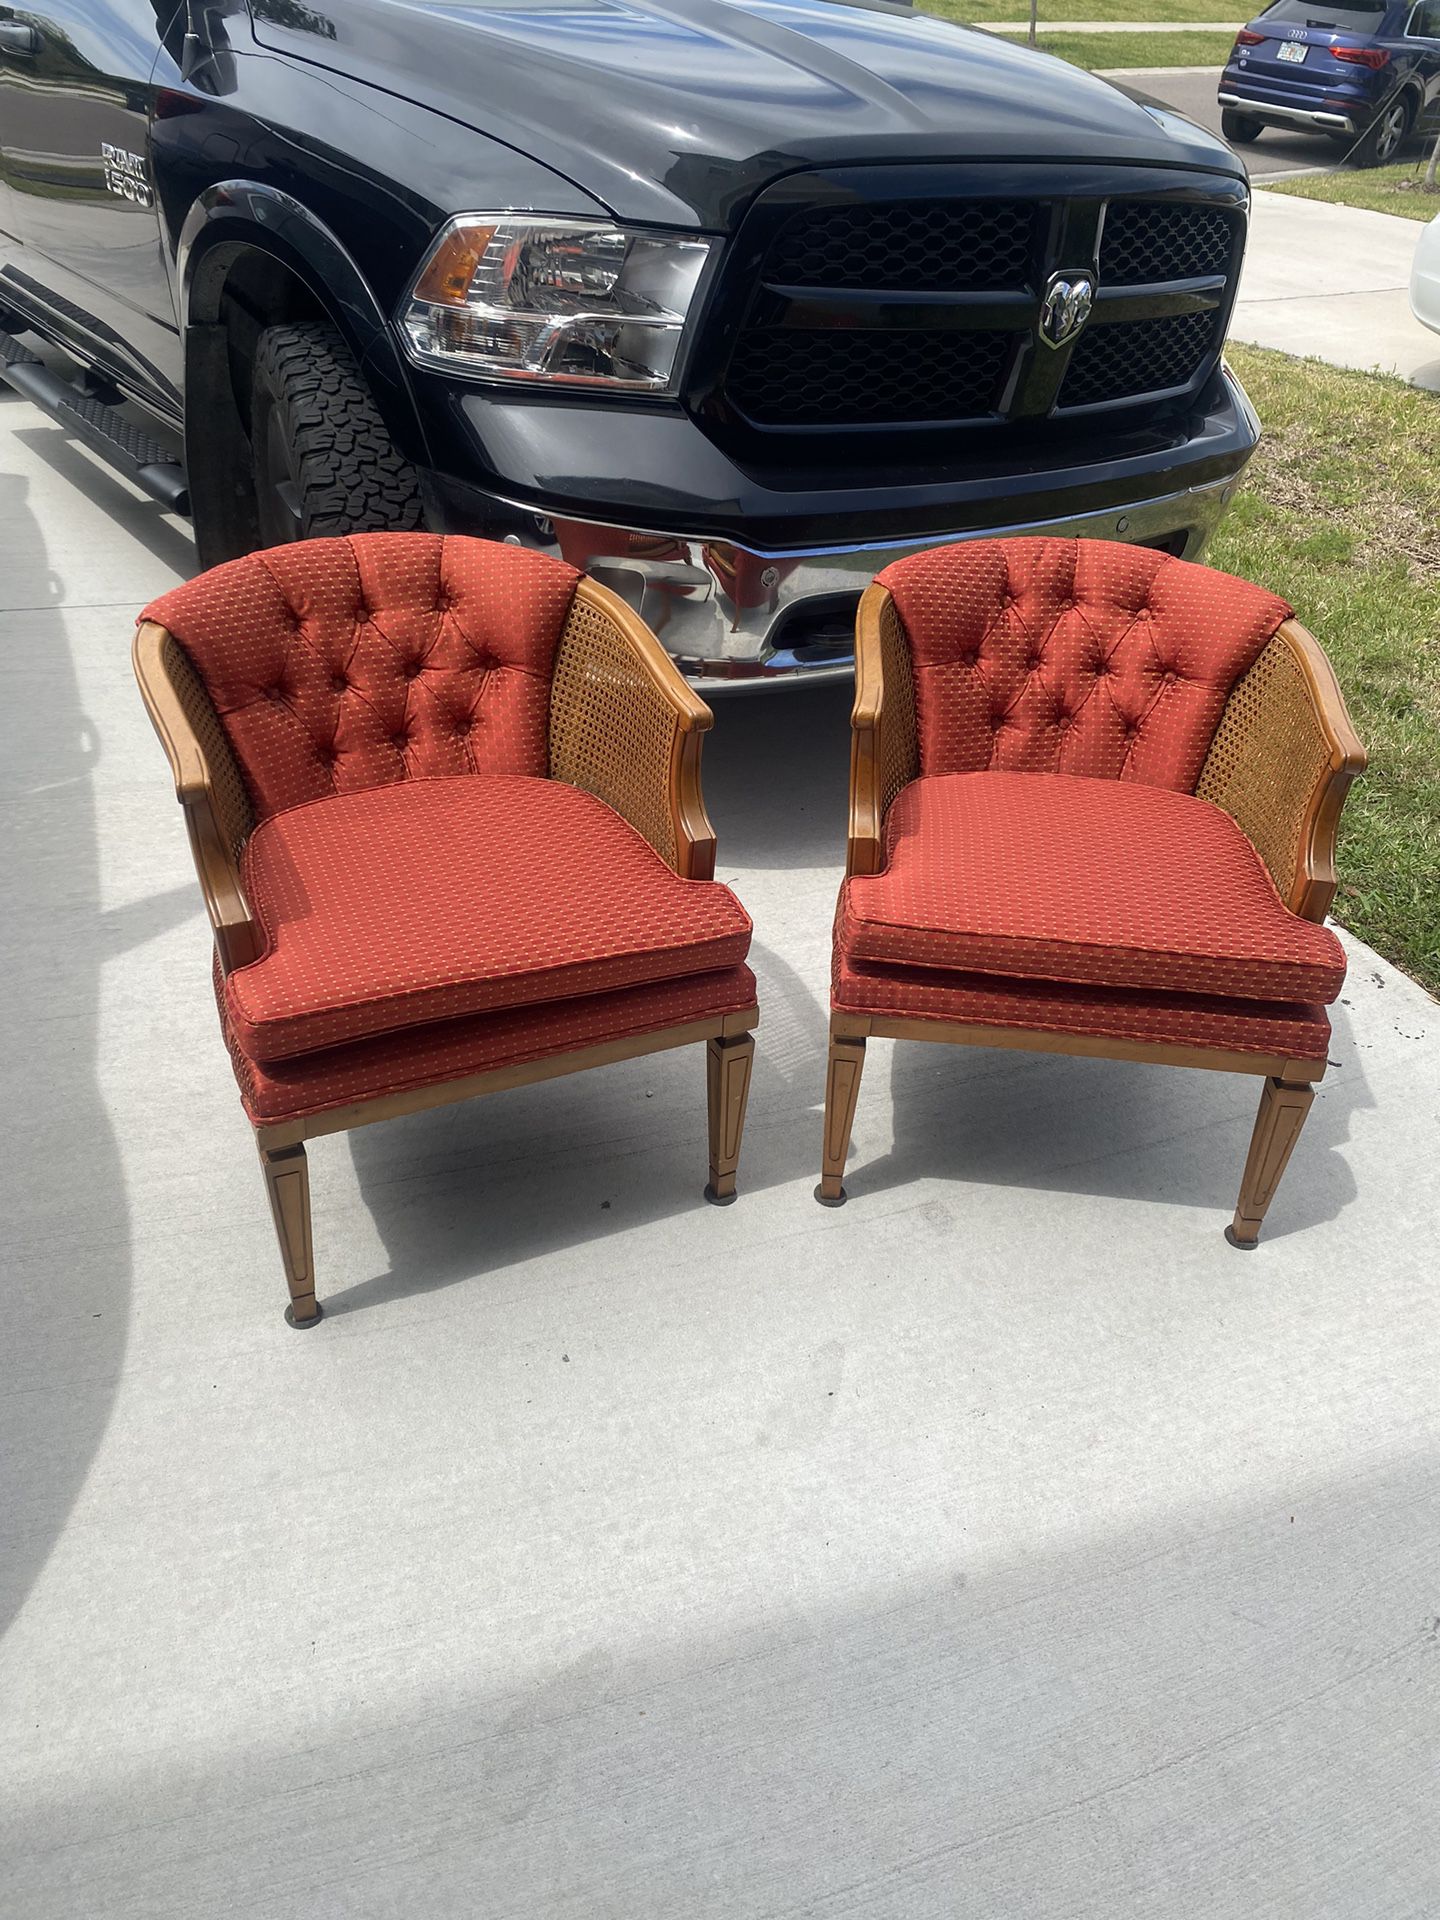 Pair of Vintage Mid Century Upholstered Wooden Tufted Chair